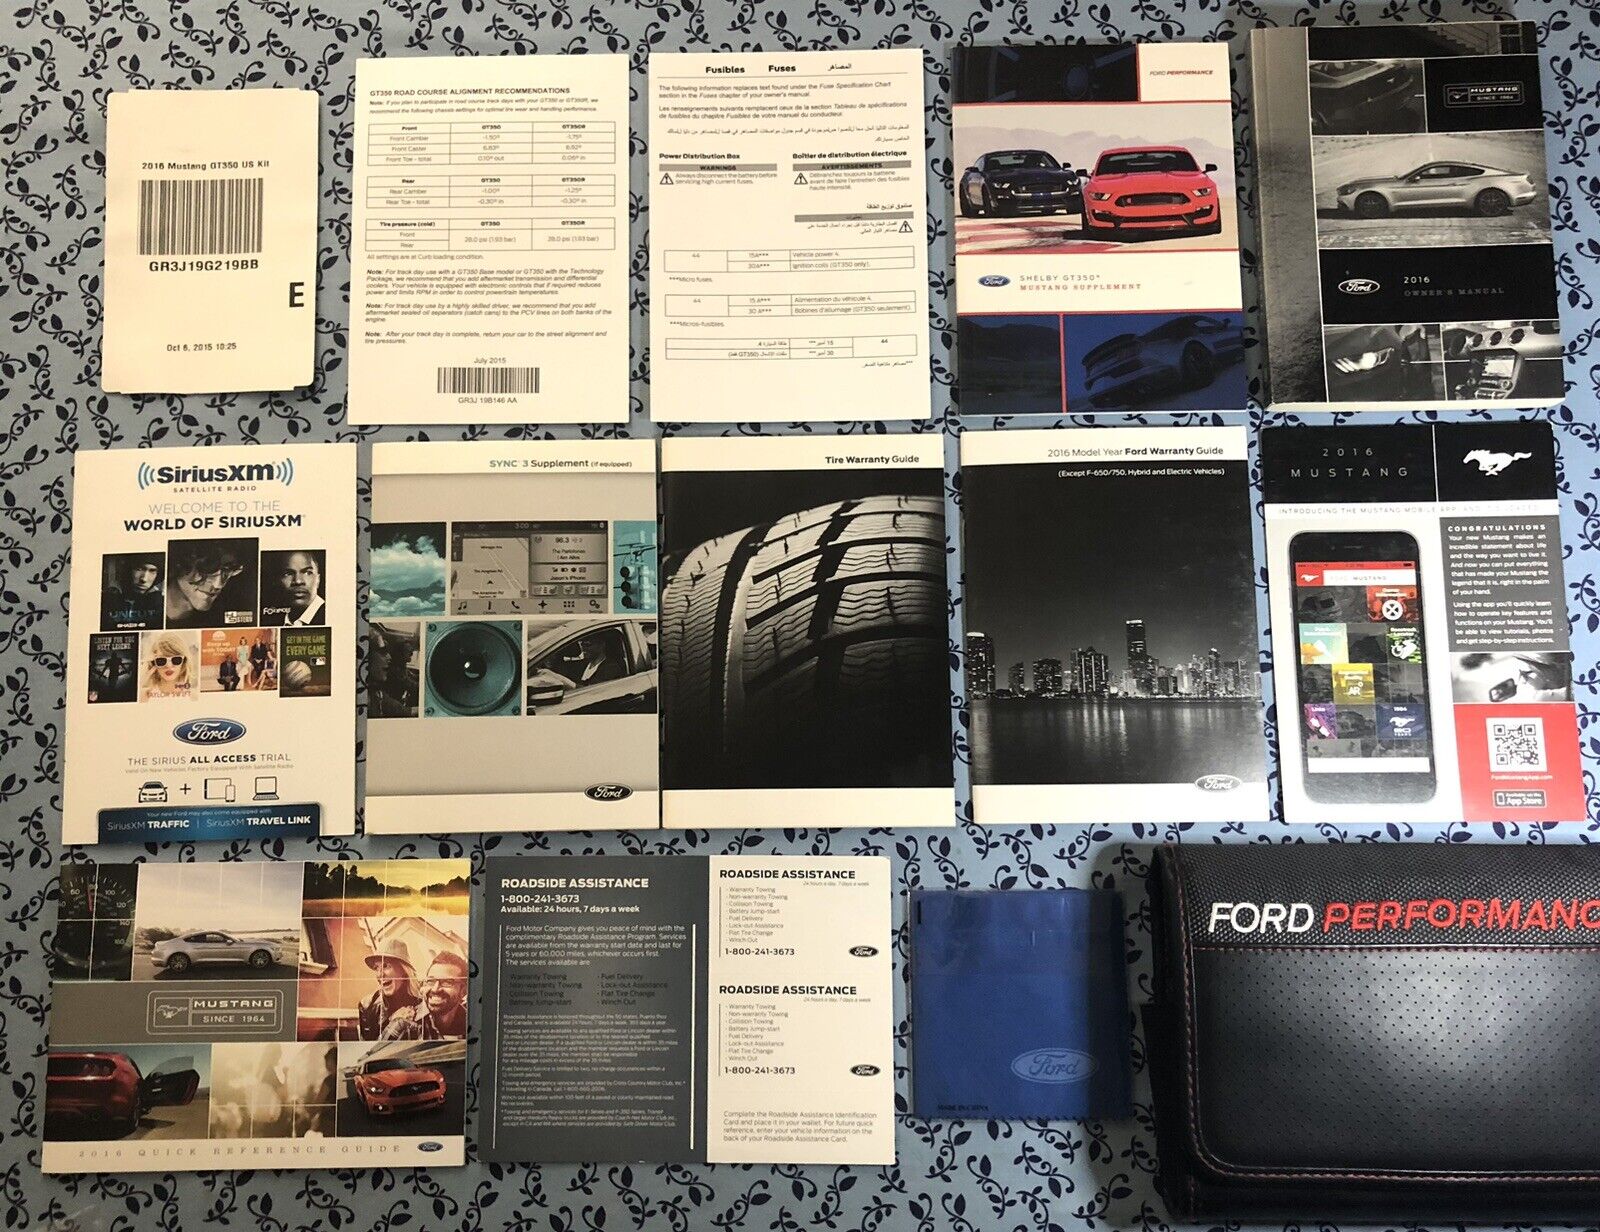 2016 FORD MUSTANG SHELBY GT350 GT350R OWNERS MANUAL SYNC 3 FULL OEM SET MINT